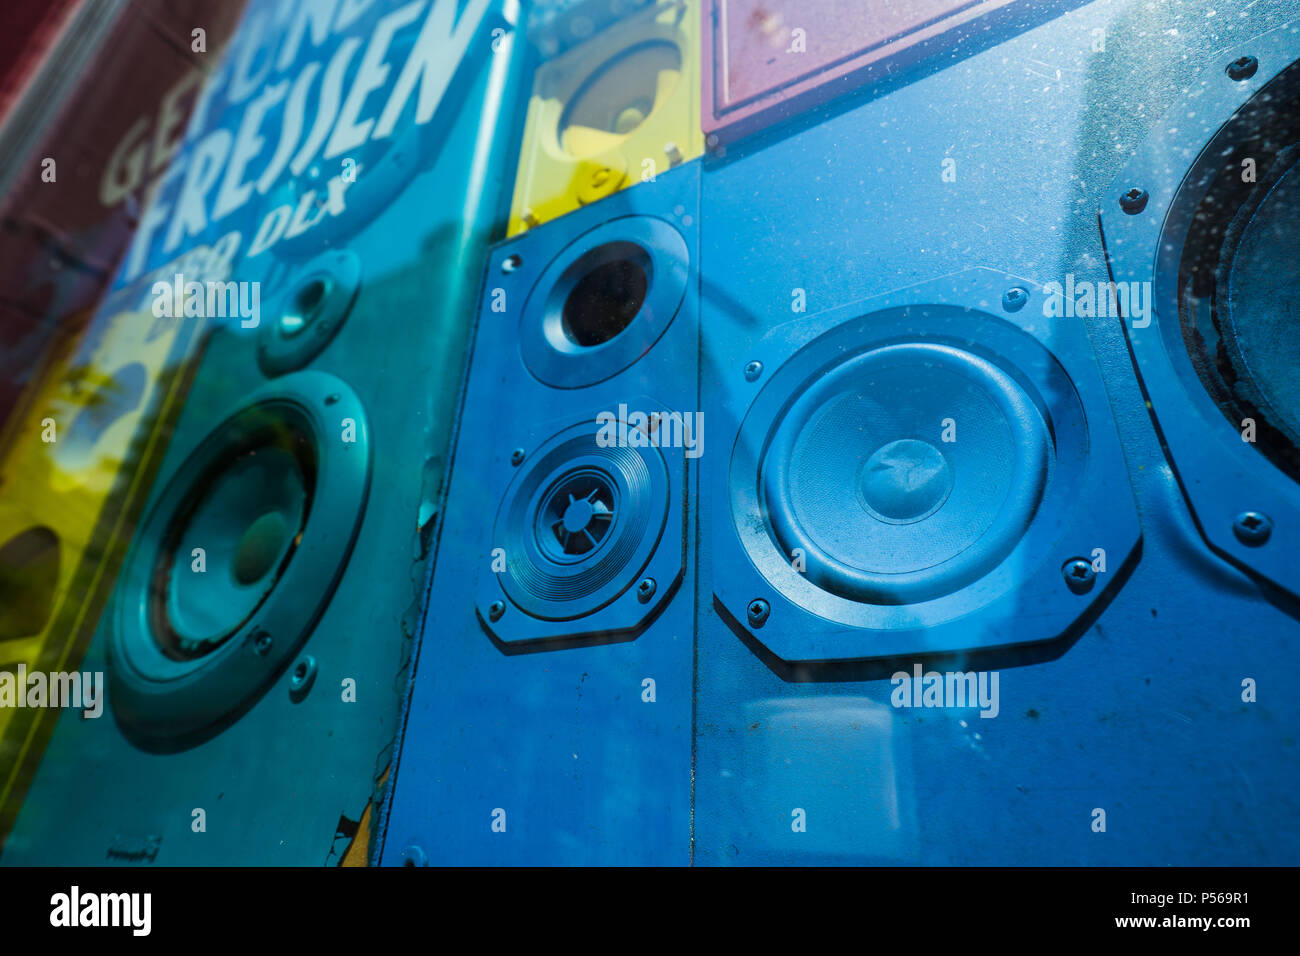 Old colorful sound speakers boxes in shop window vitrine. Concept of retro vintage interior decoration Stock Photo